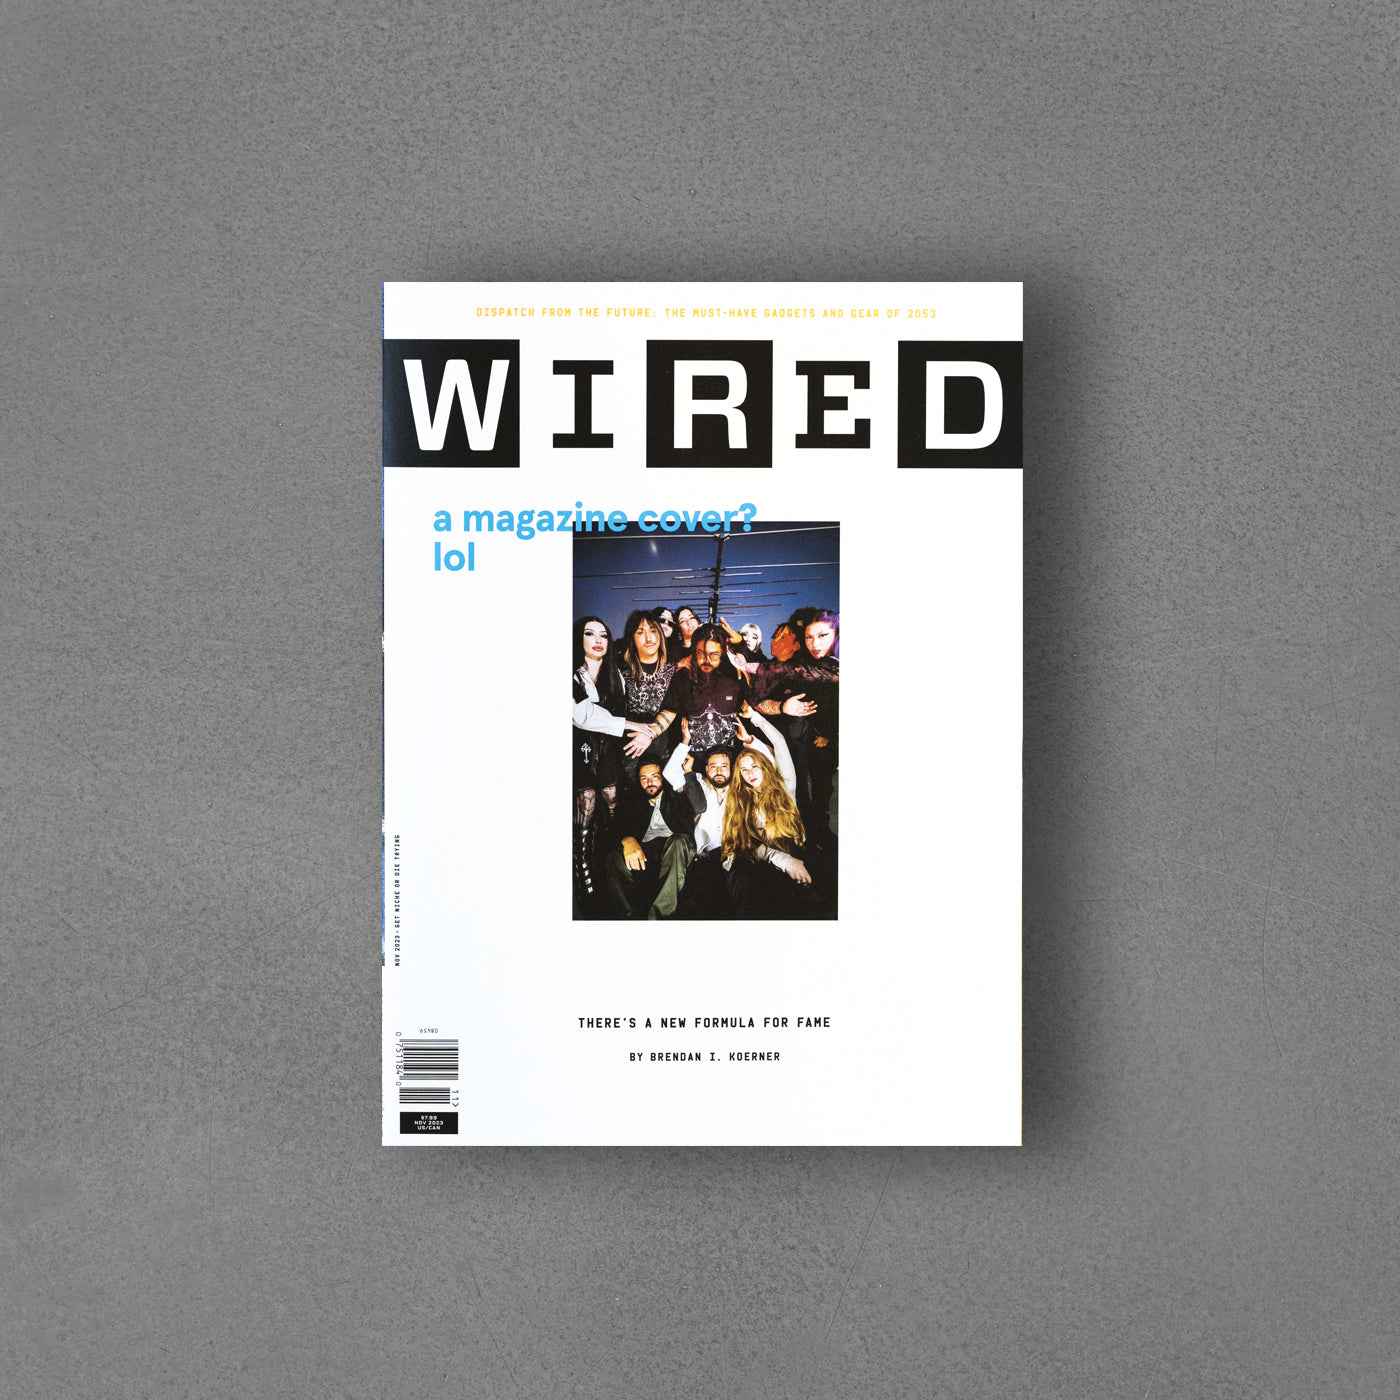 Wired, 11/23